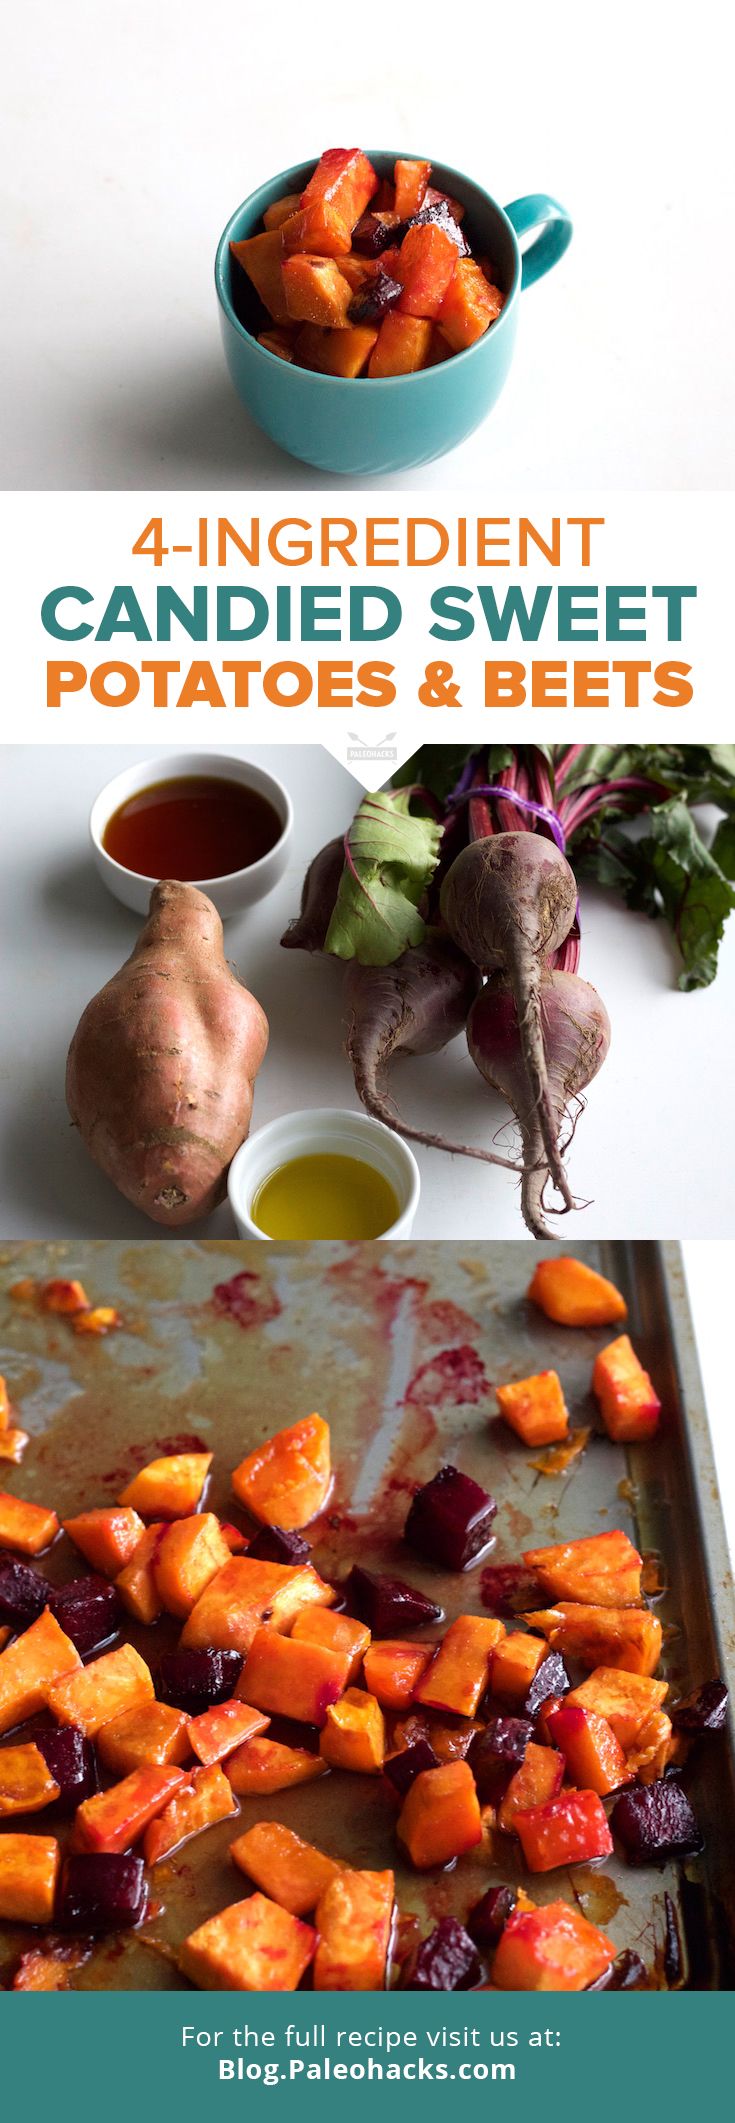 PIN-4-ingredient-candied-sweet-potatoes-beets